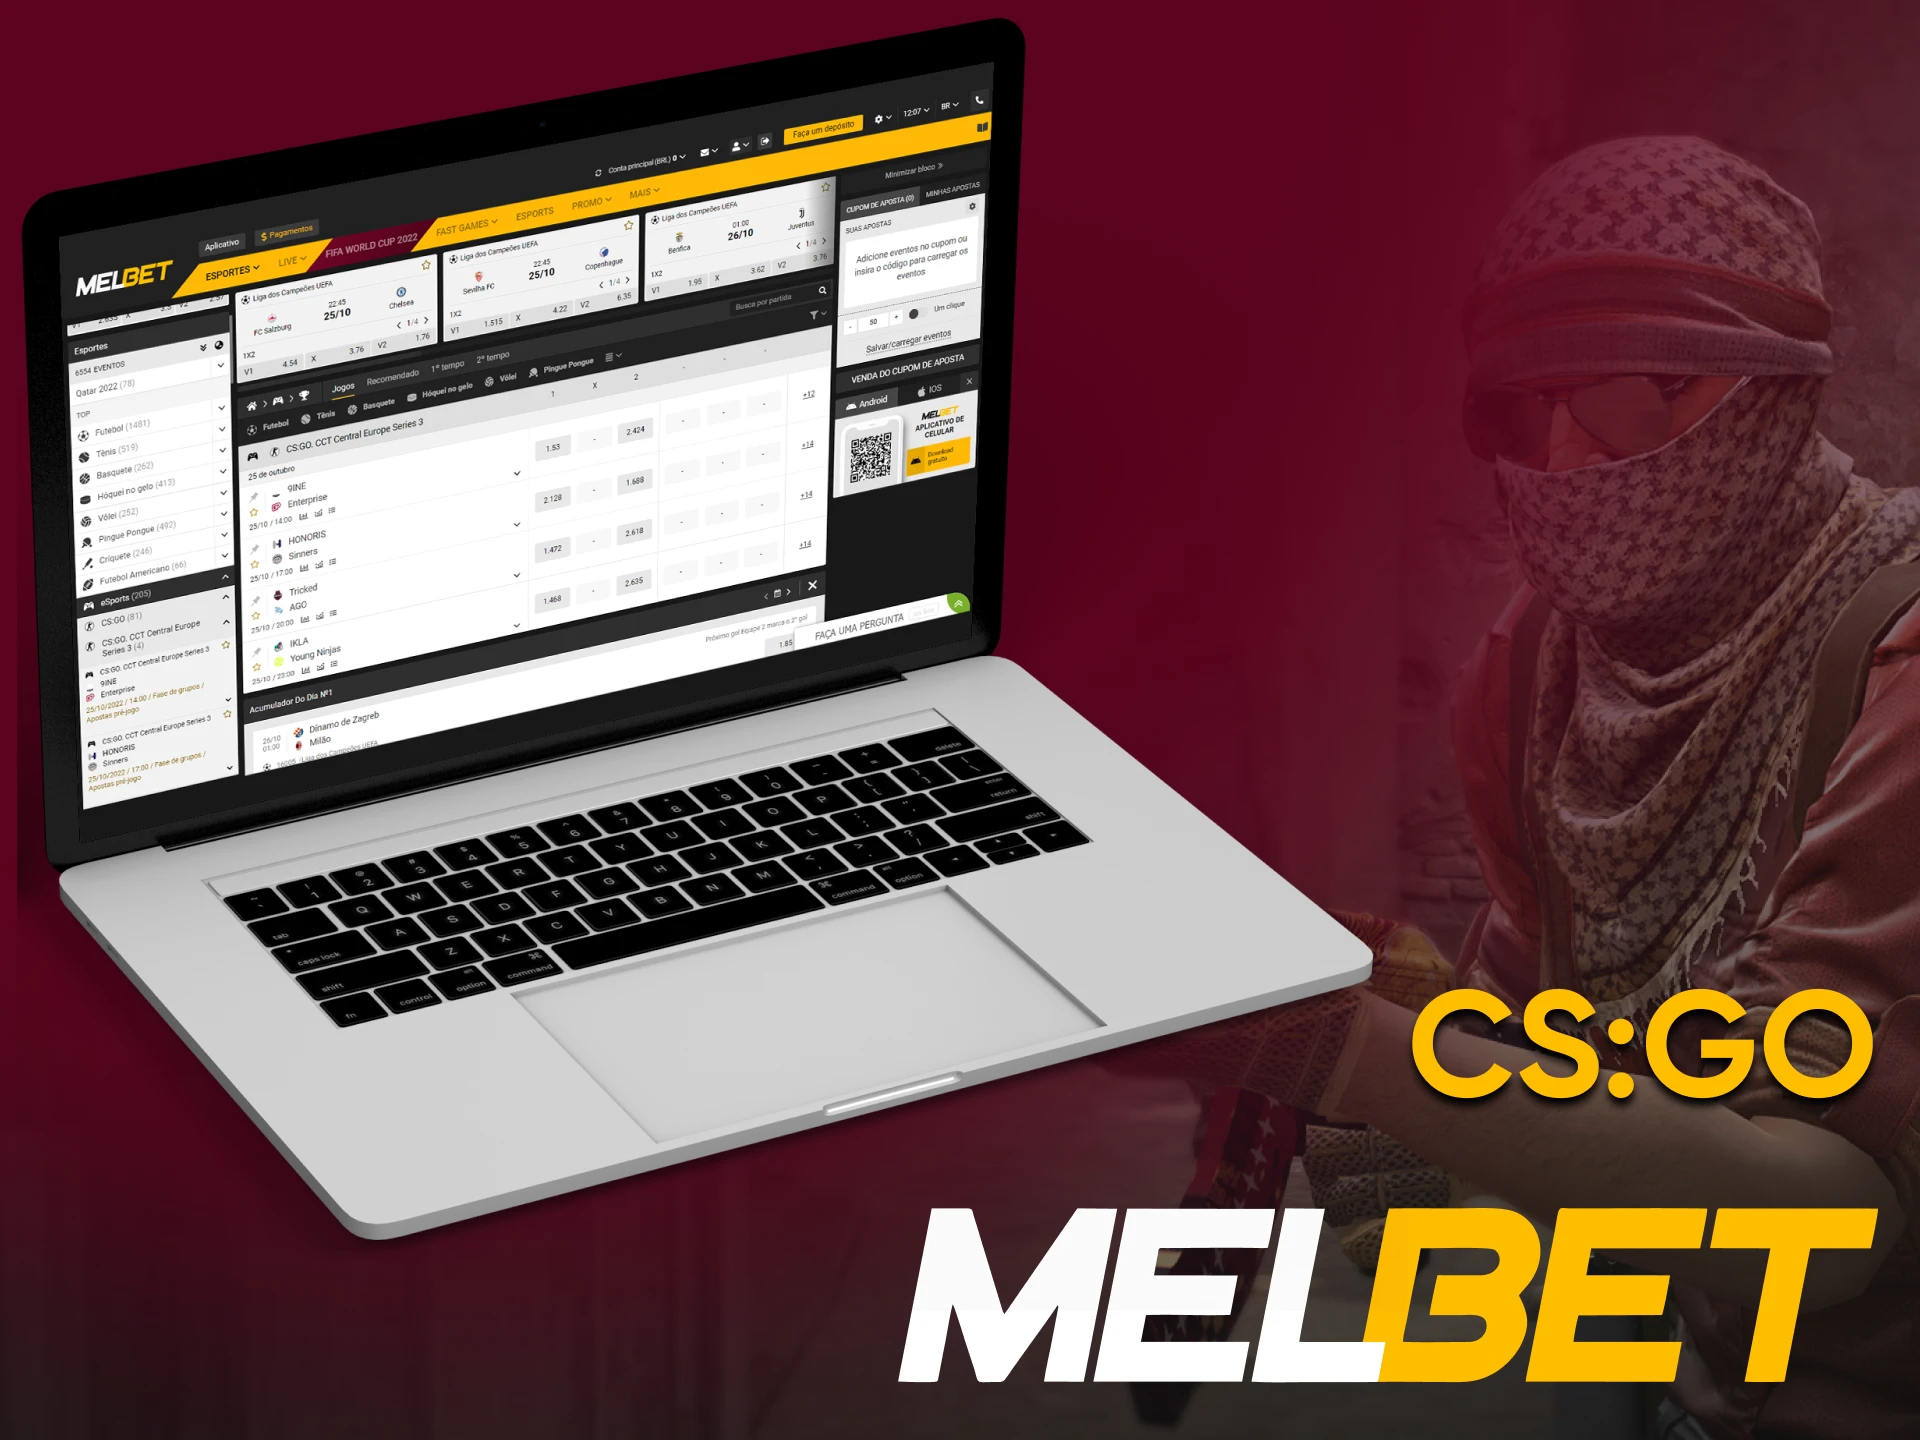 On the Melbet website you can play CS:GO.